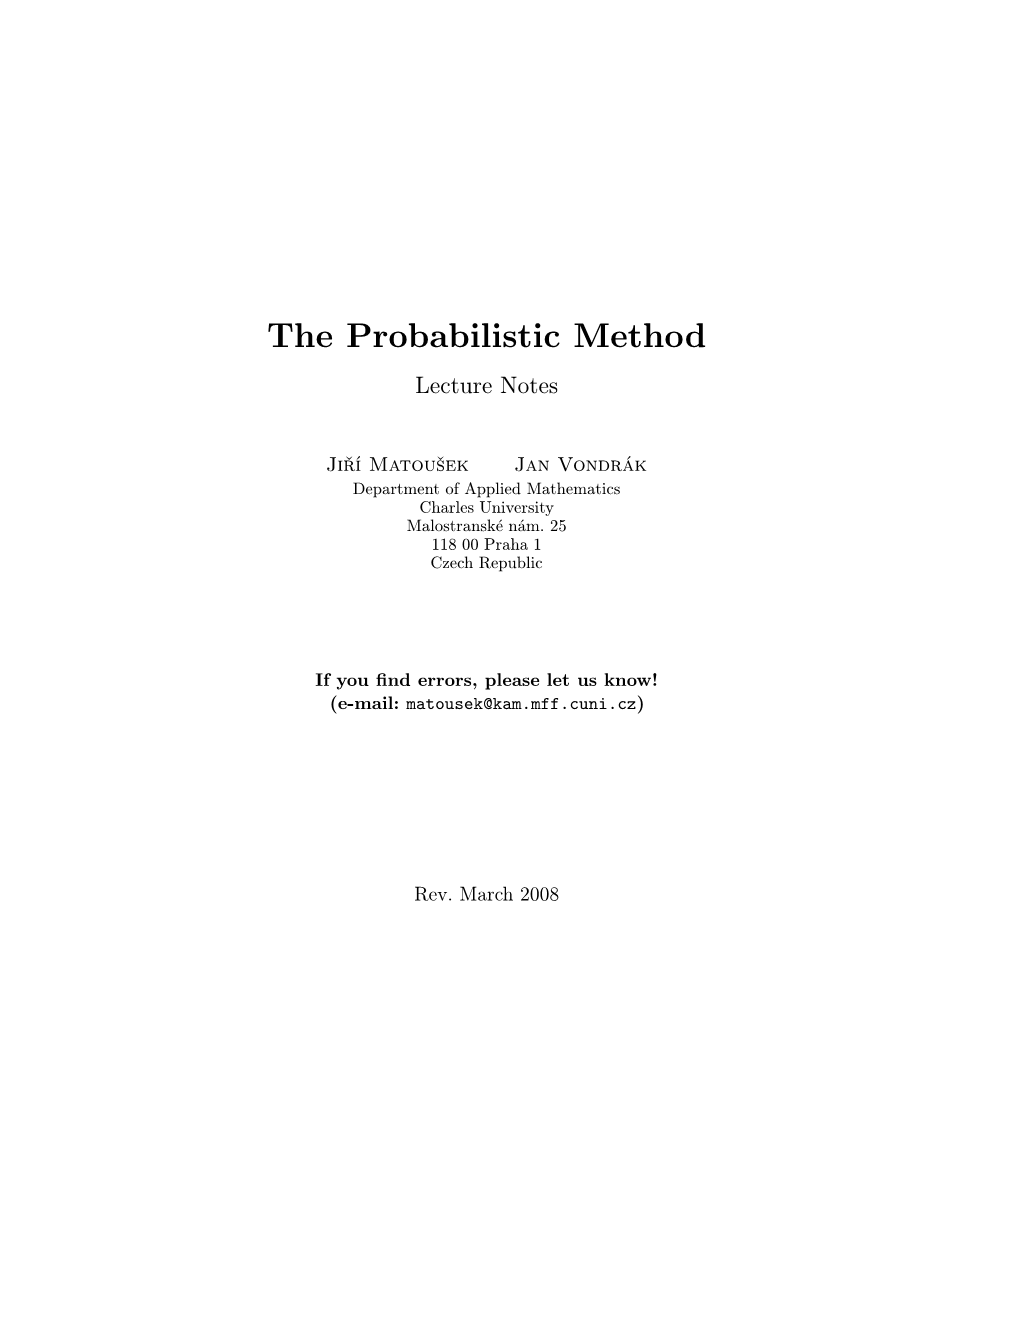 Lecture Notes on the Probabilistic Method